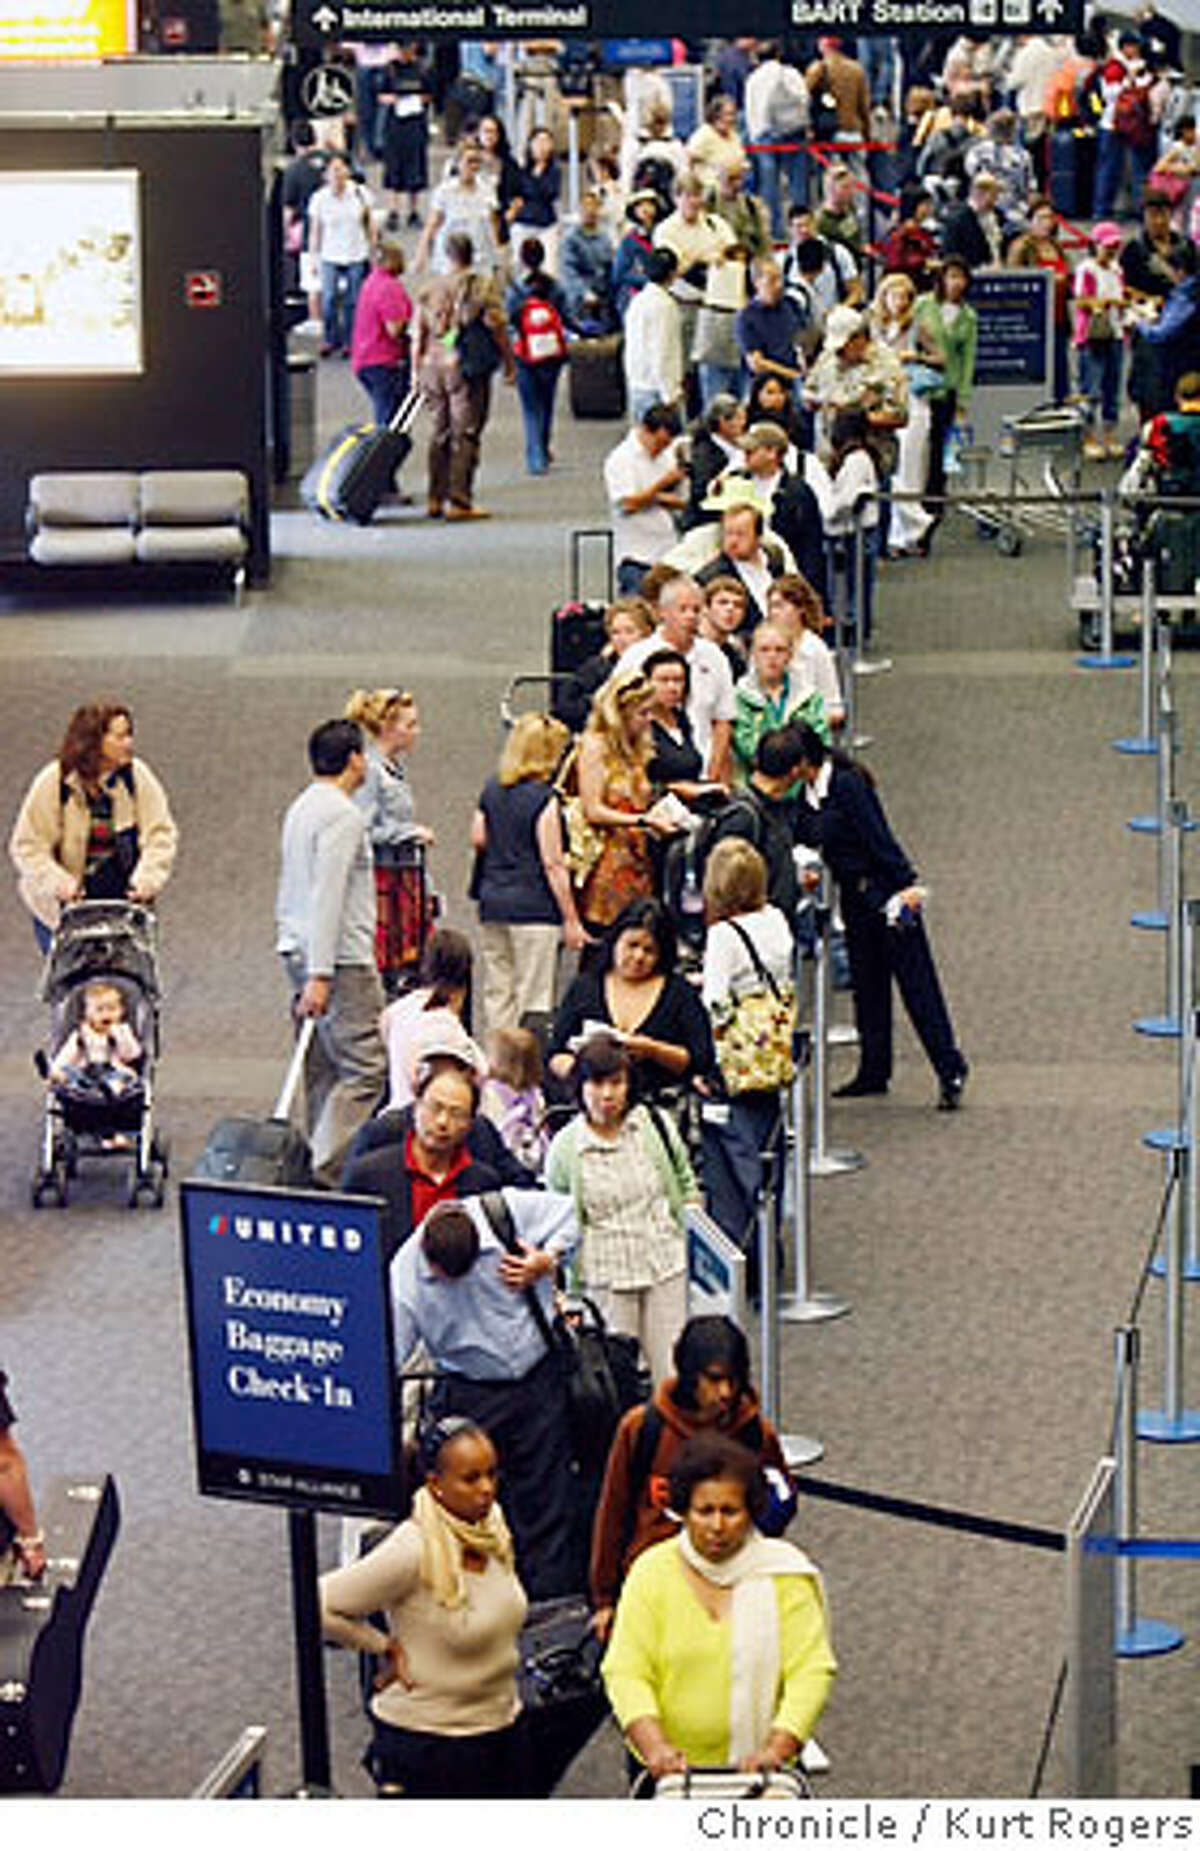 After a computer malfunction with United Airlines they stopped service nation wide. The problem was fixed but lines at San Francisco international Airport were long waiting for a United flight. WEDNESDAY, JUNE 20, 2007 KURT ROGERS SAN FRANCISCO SFC THE CHRONICLE